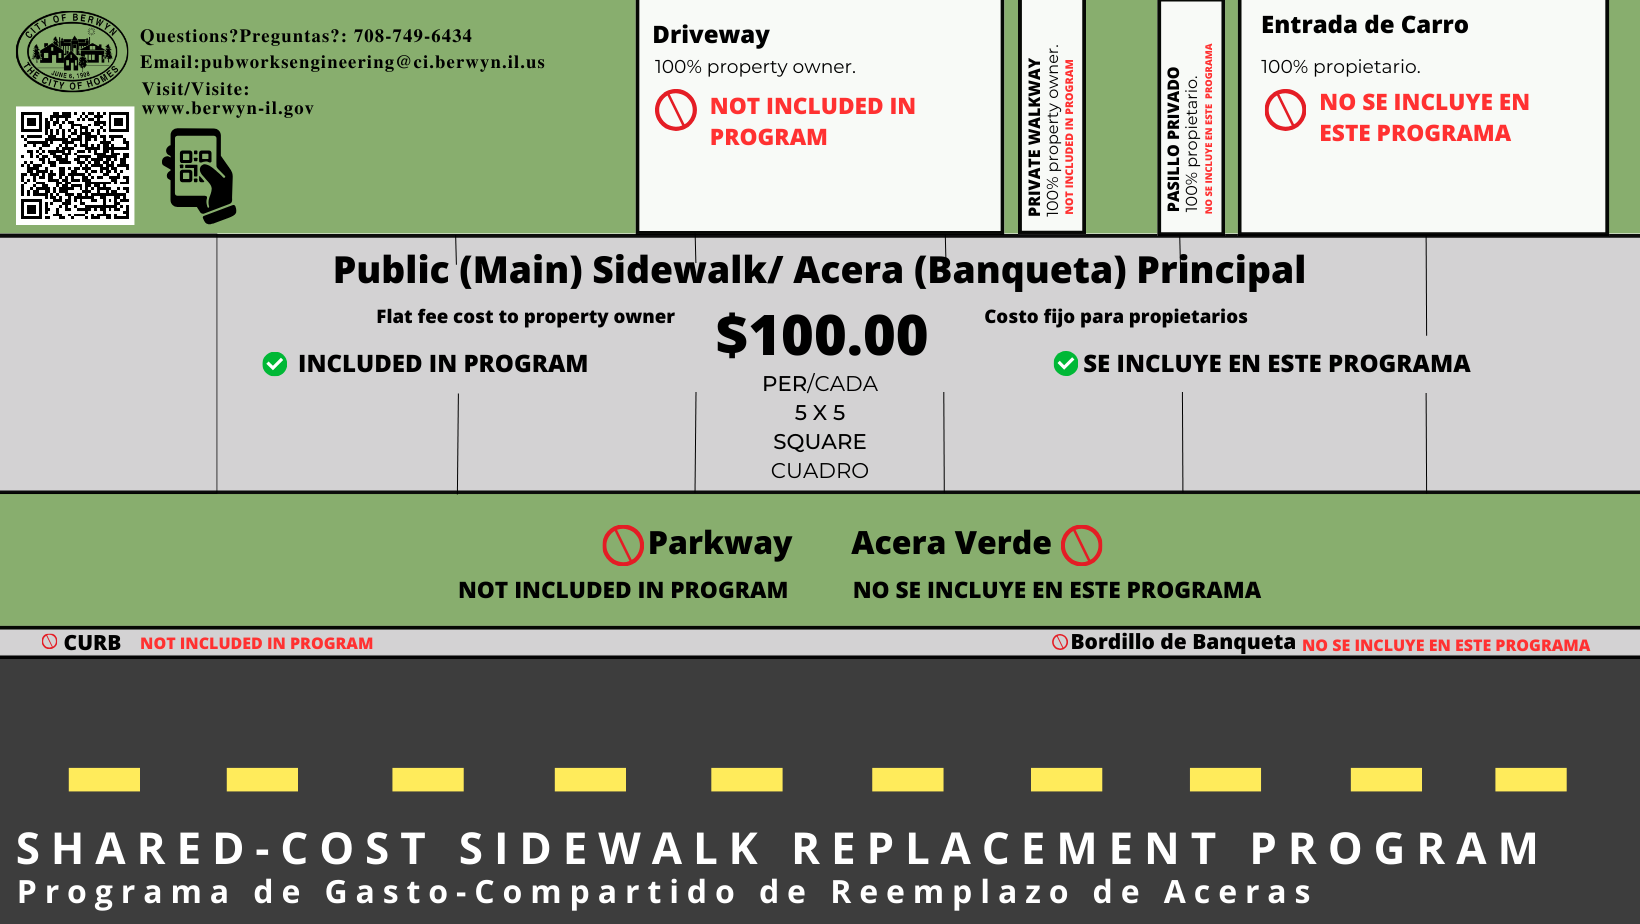 WHAT’S INCLUDED IN THE SHARED COST SIDEWALK PROGRAM